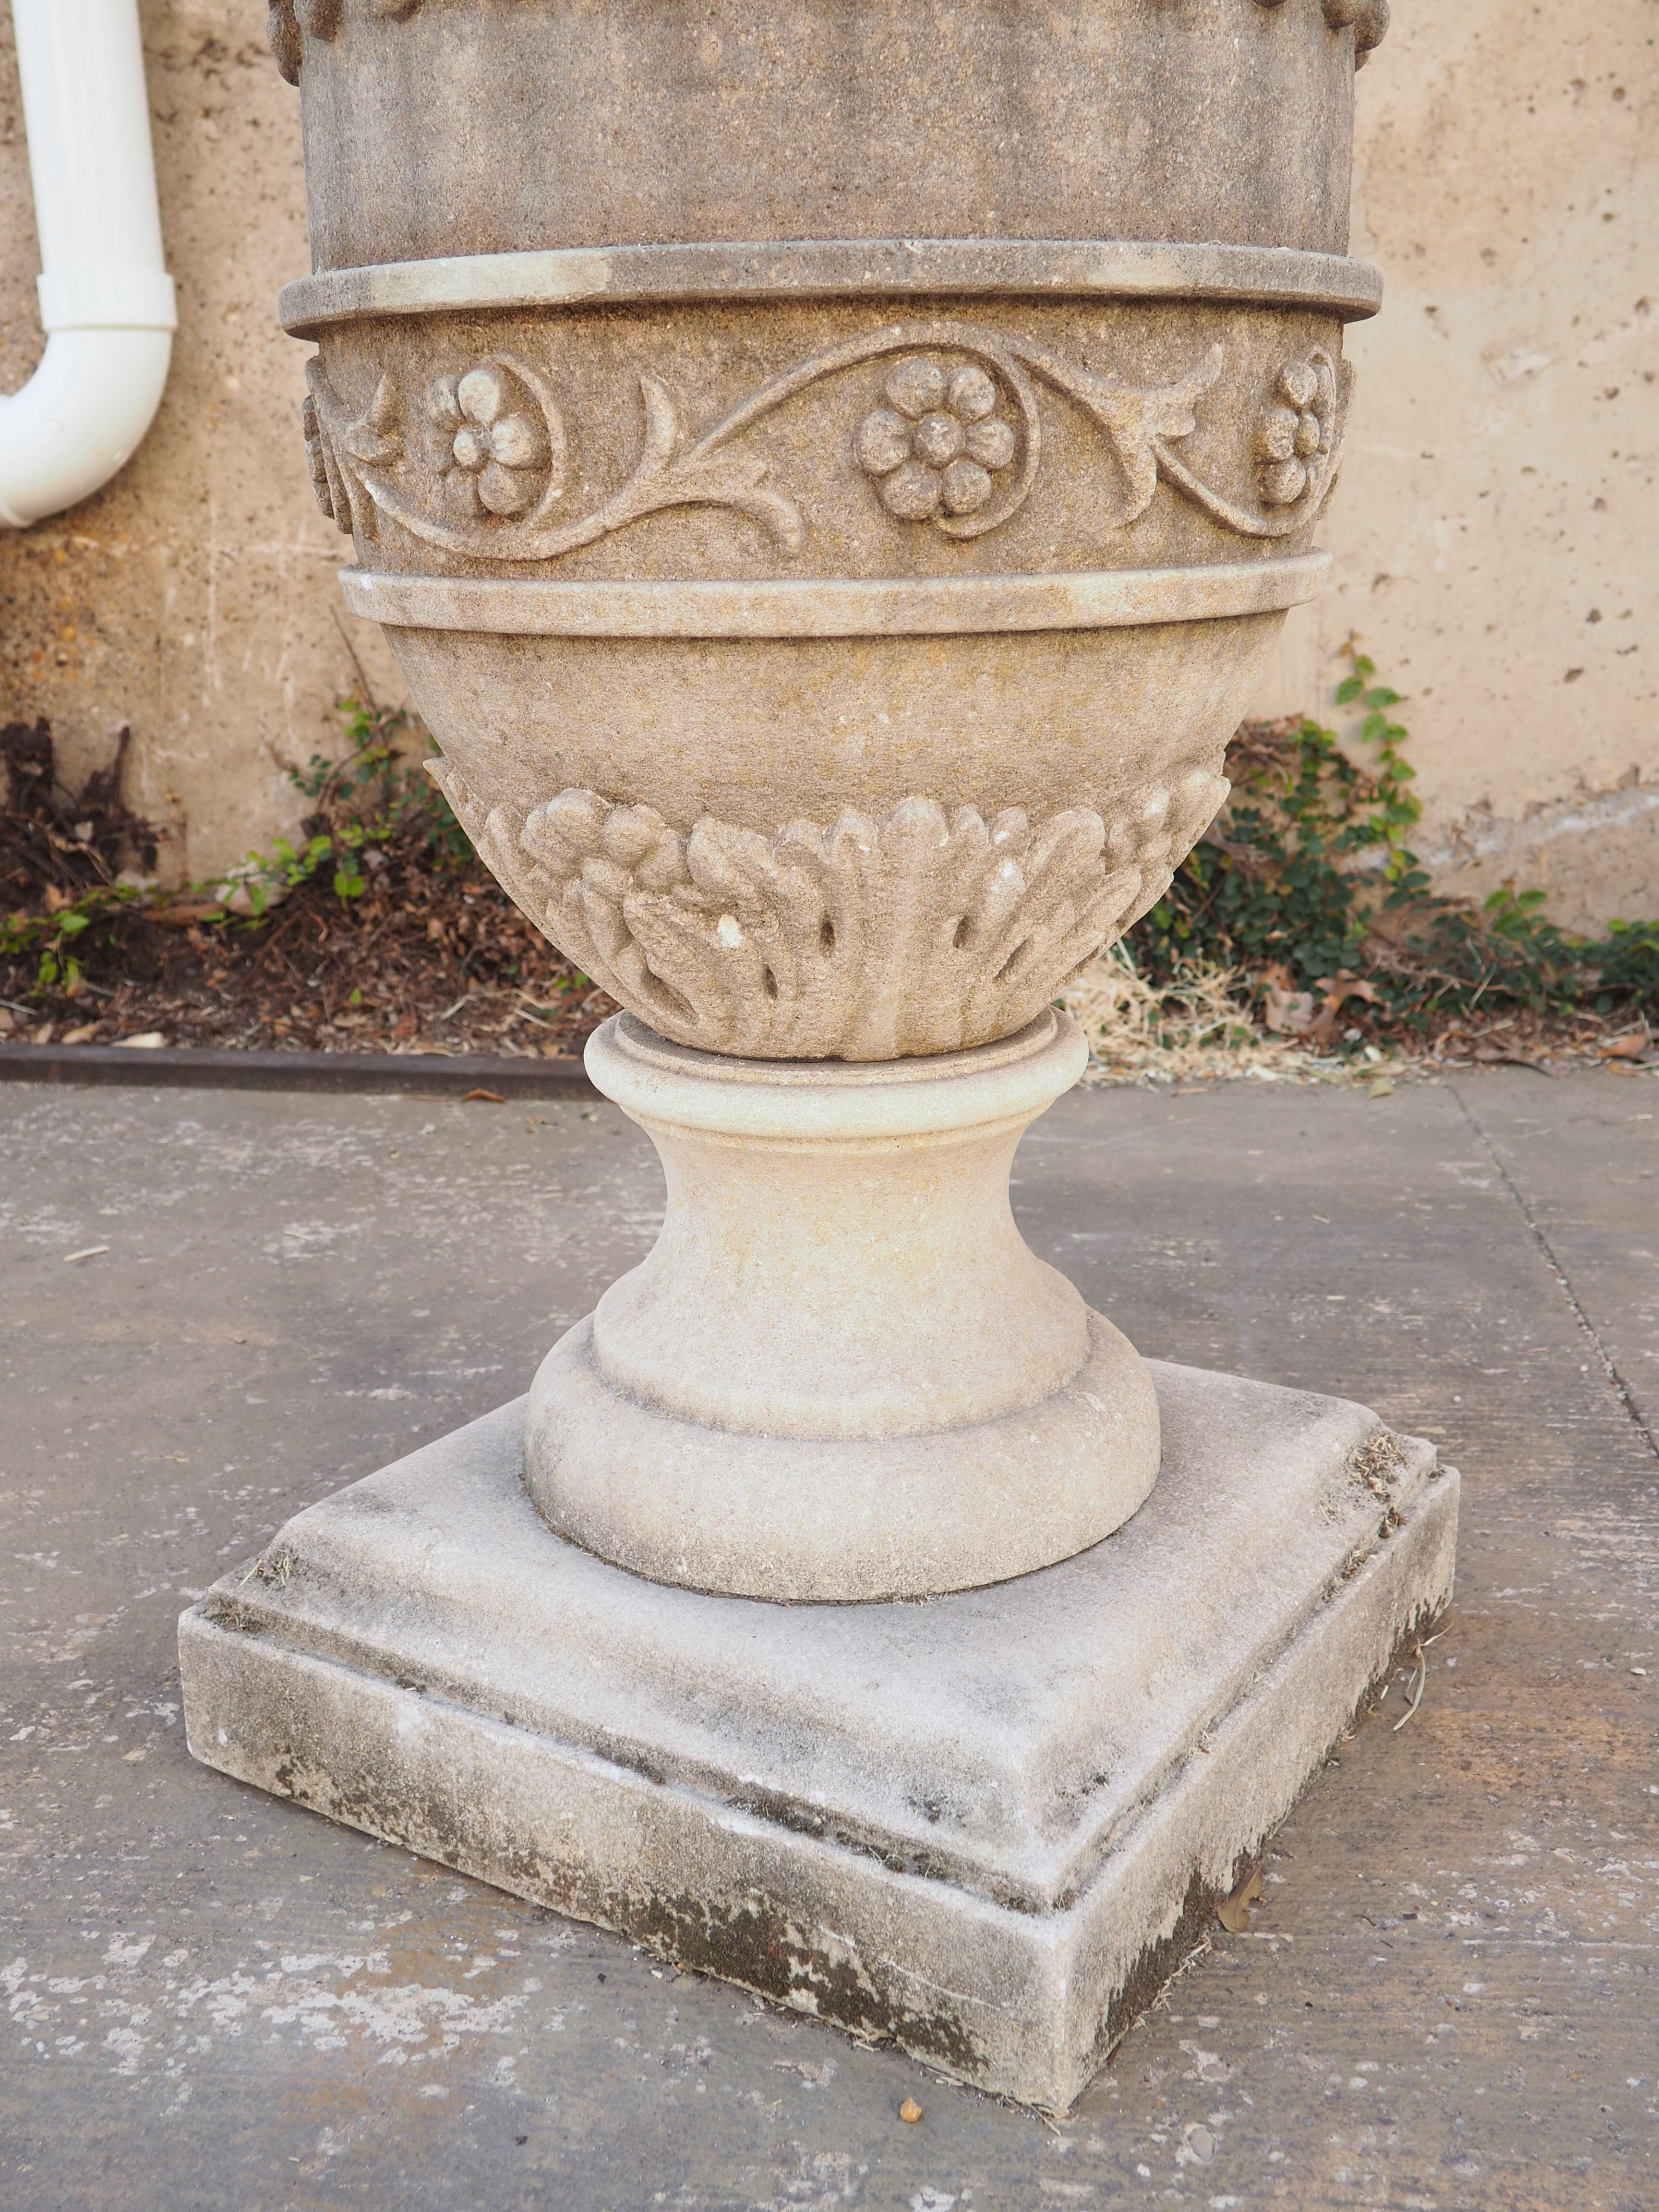 Hand-Carved Limestone Garden Armillary Sundial with Carved Tassels and Floral/Foliate Motifs